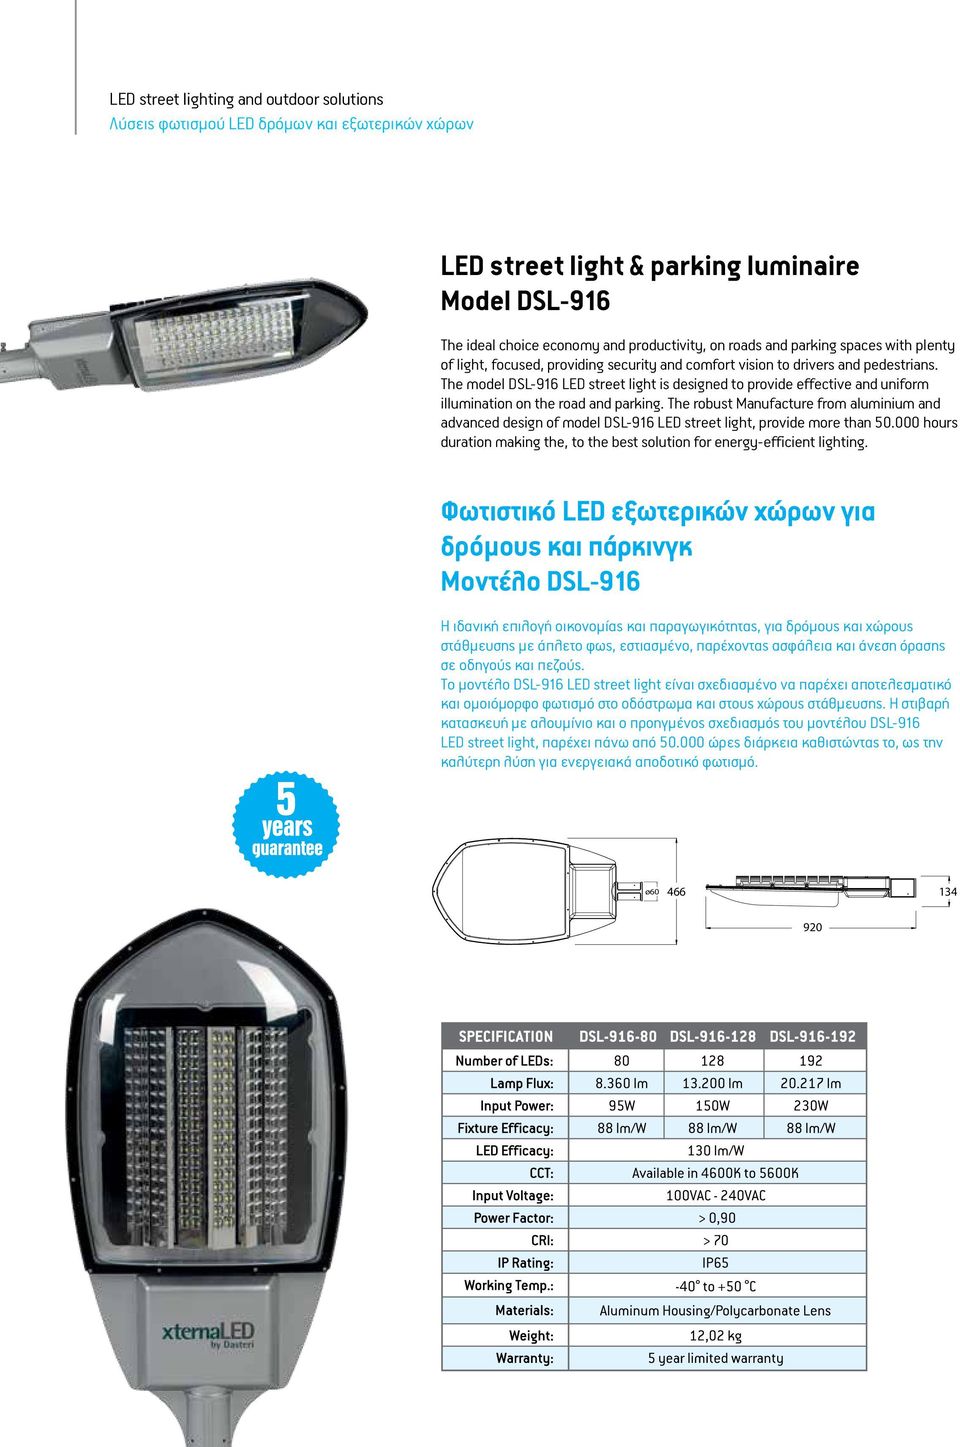 The model DSL-916 LED street light is designed to provide effective and uniform illumination on the road and parking.